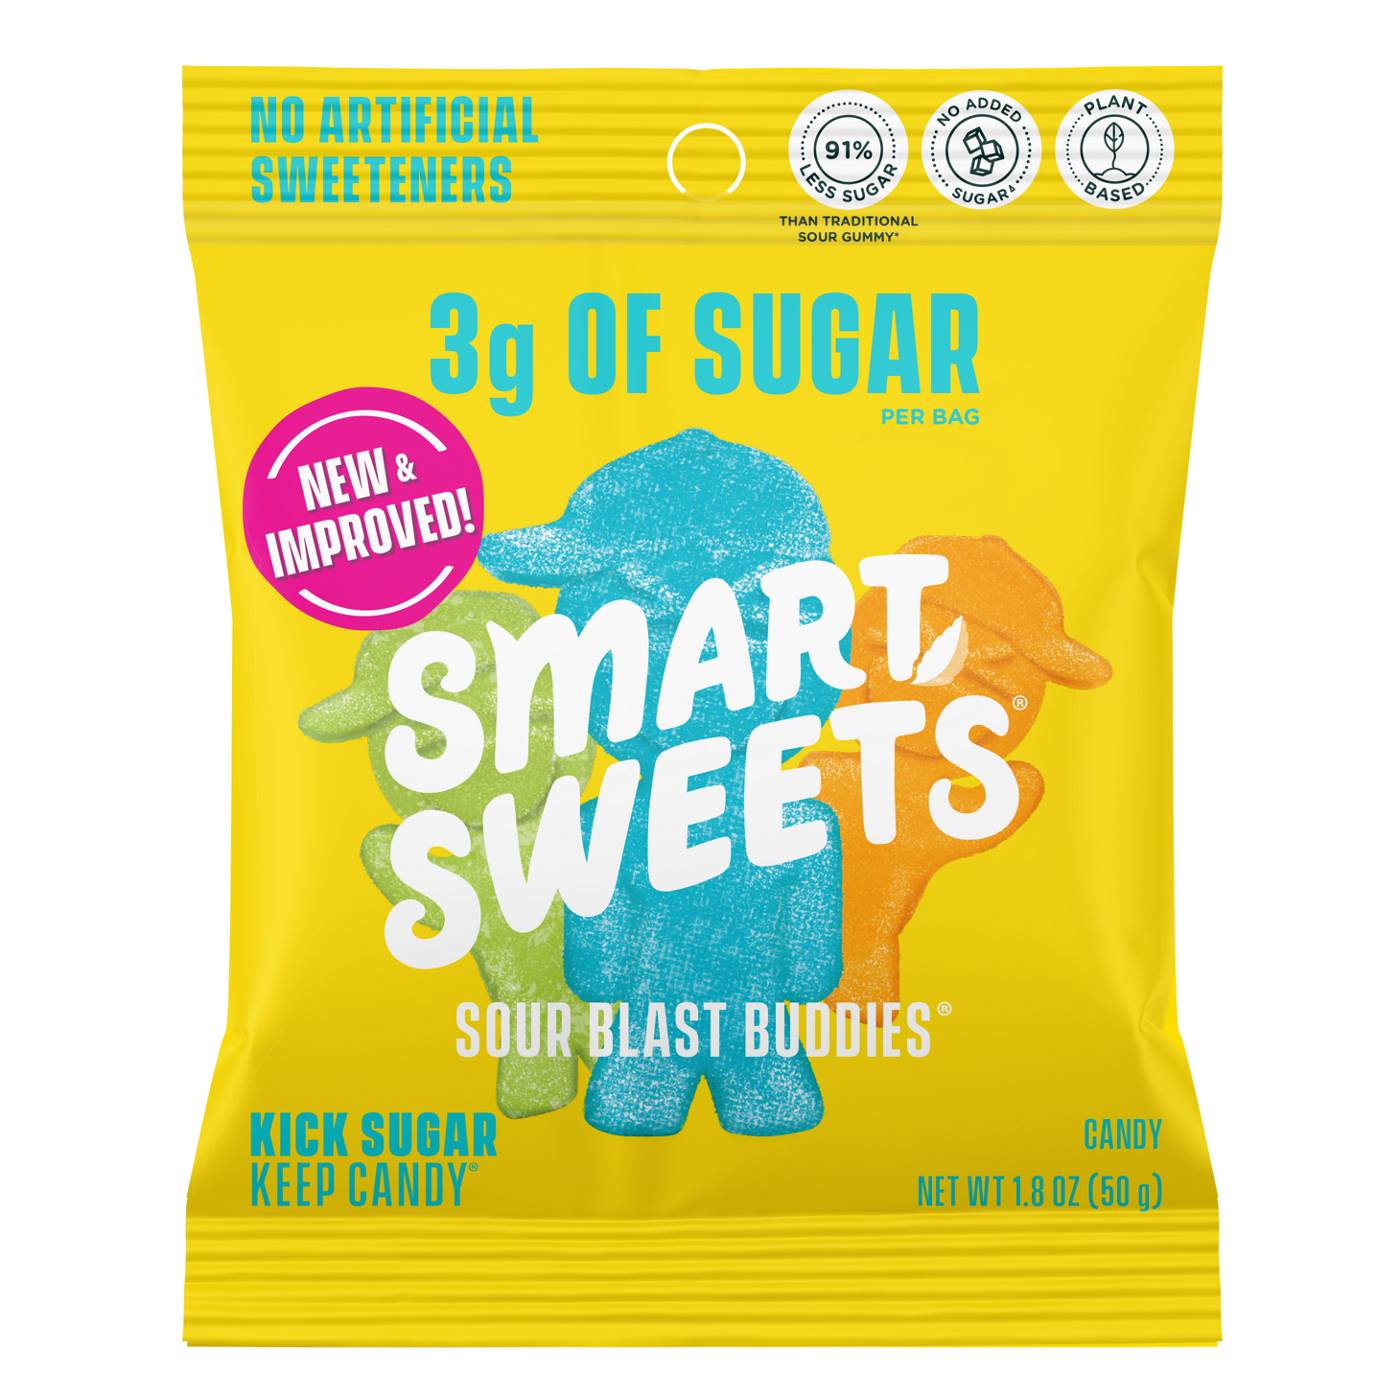 SmartSweets Sour Blast Buddies Candy; image 1 of 3